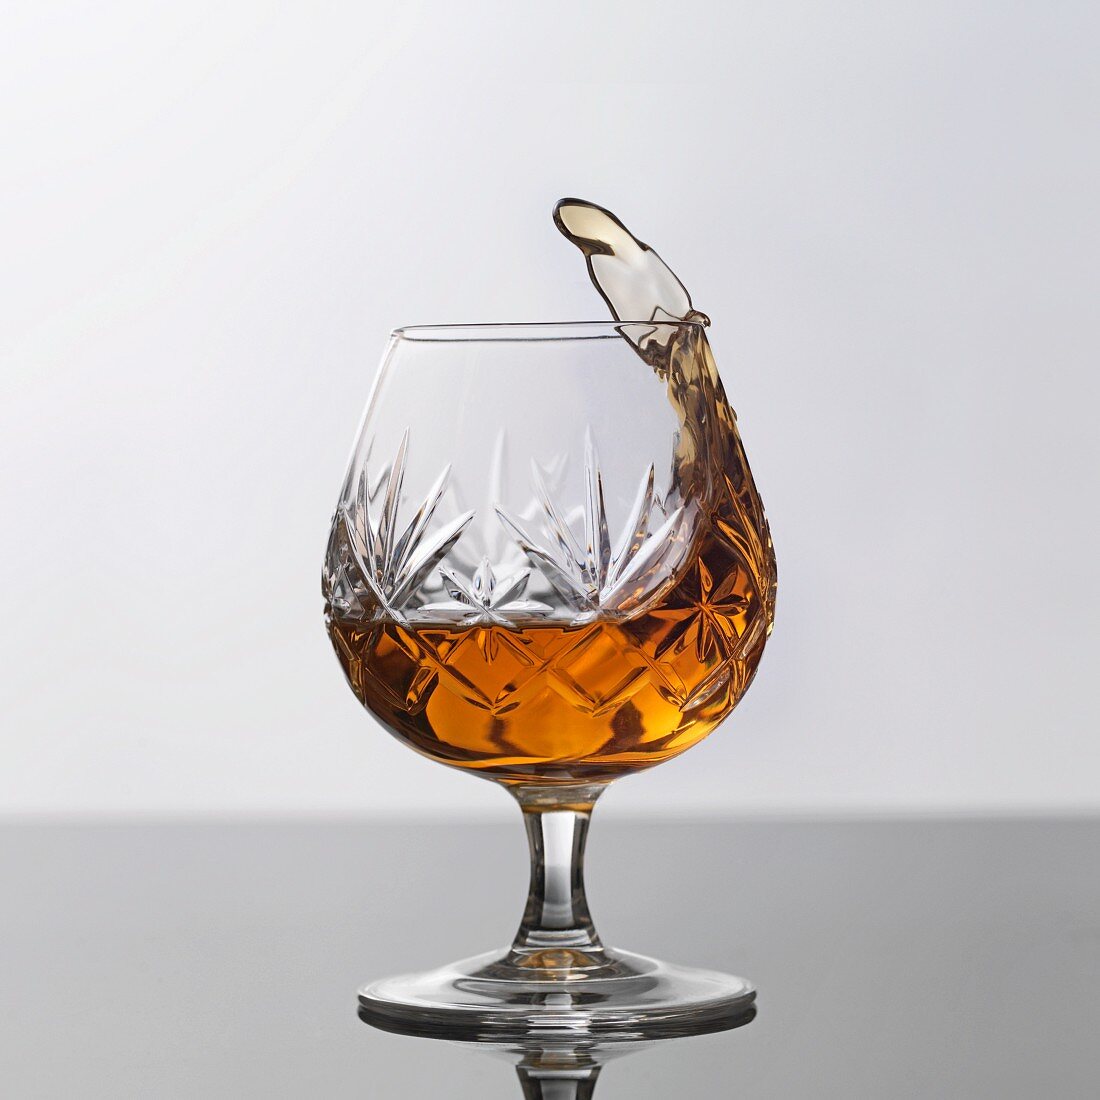 A glass of brandy splashing out of a glass